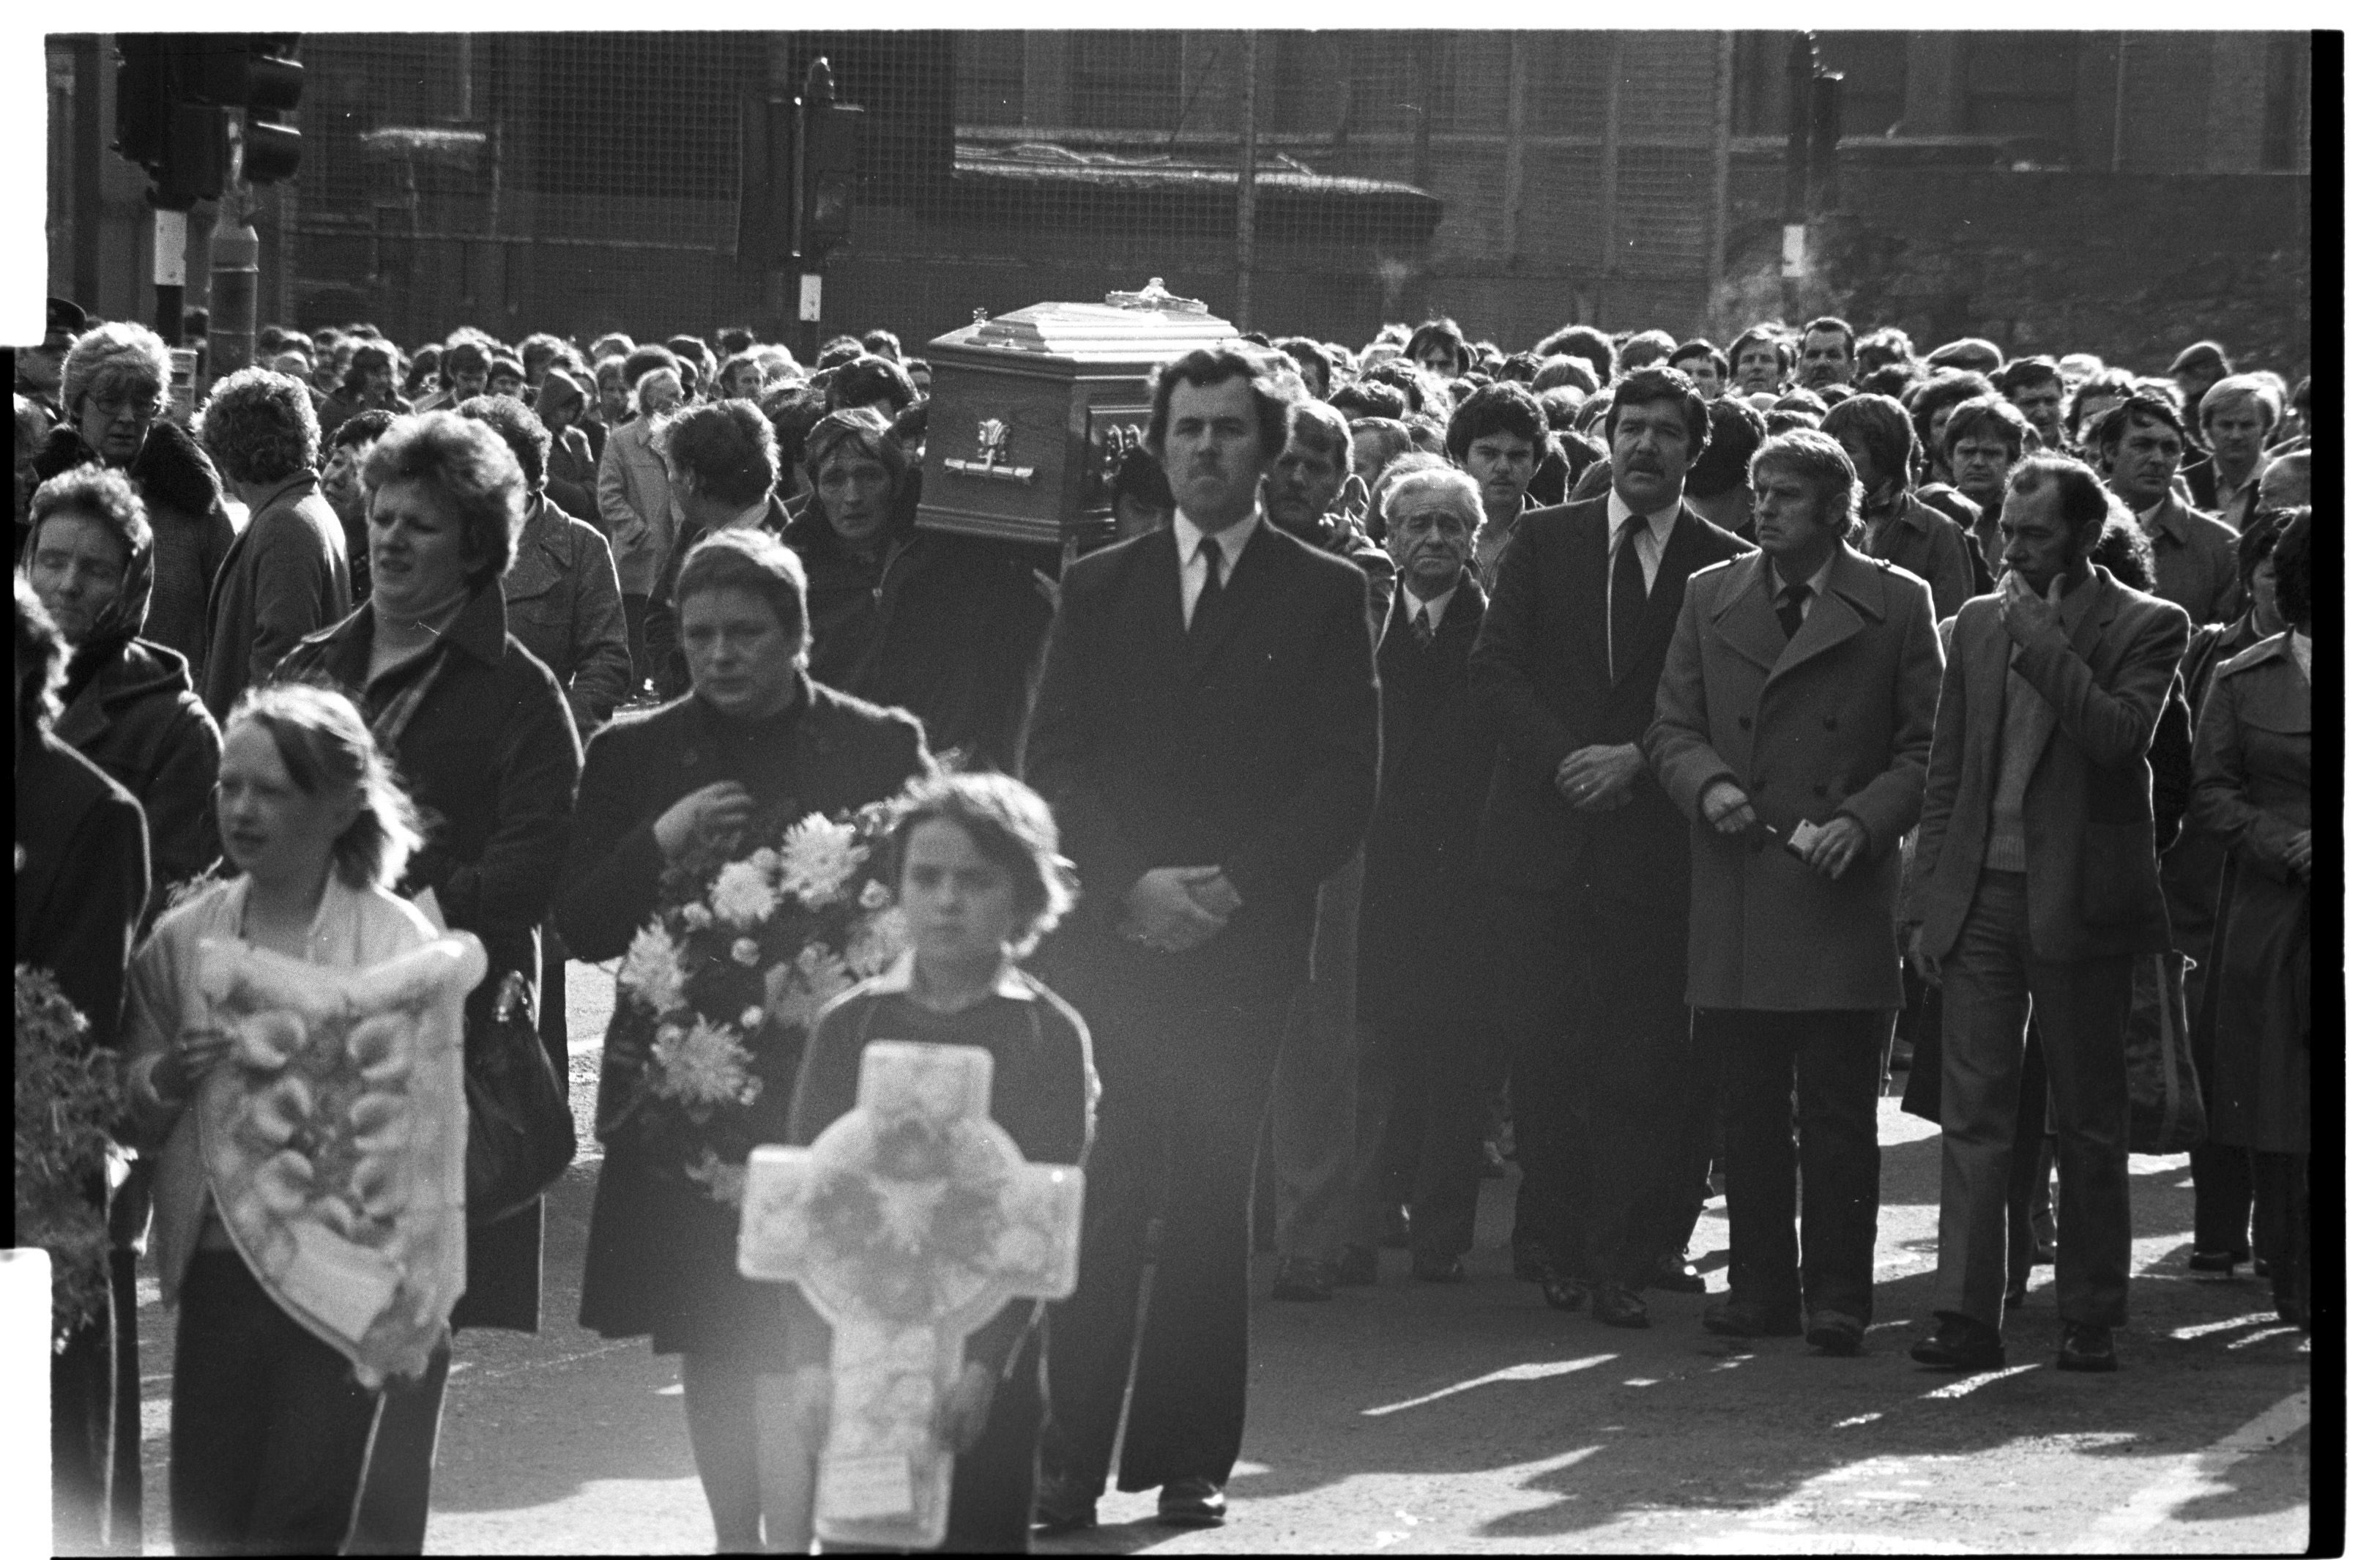 FINAL JOURNEY: The funeral of Councillor Larry Kennedy, who was murdered leaving the Shamrock Club in Ardoyne